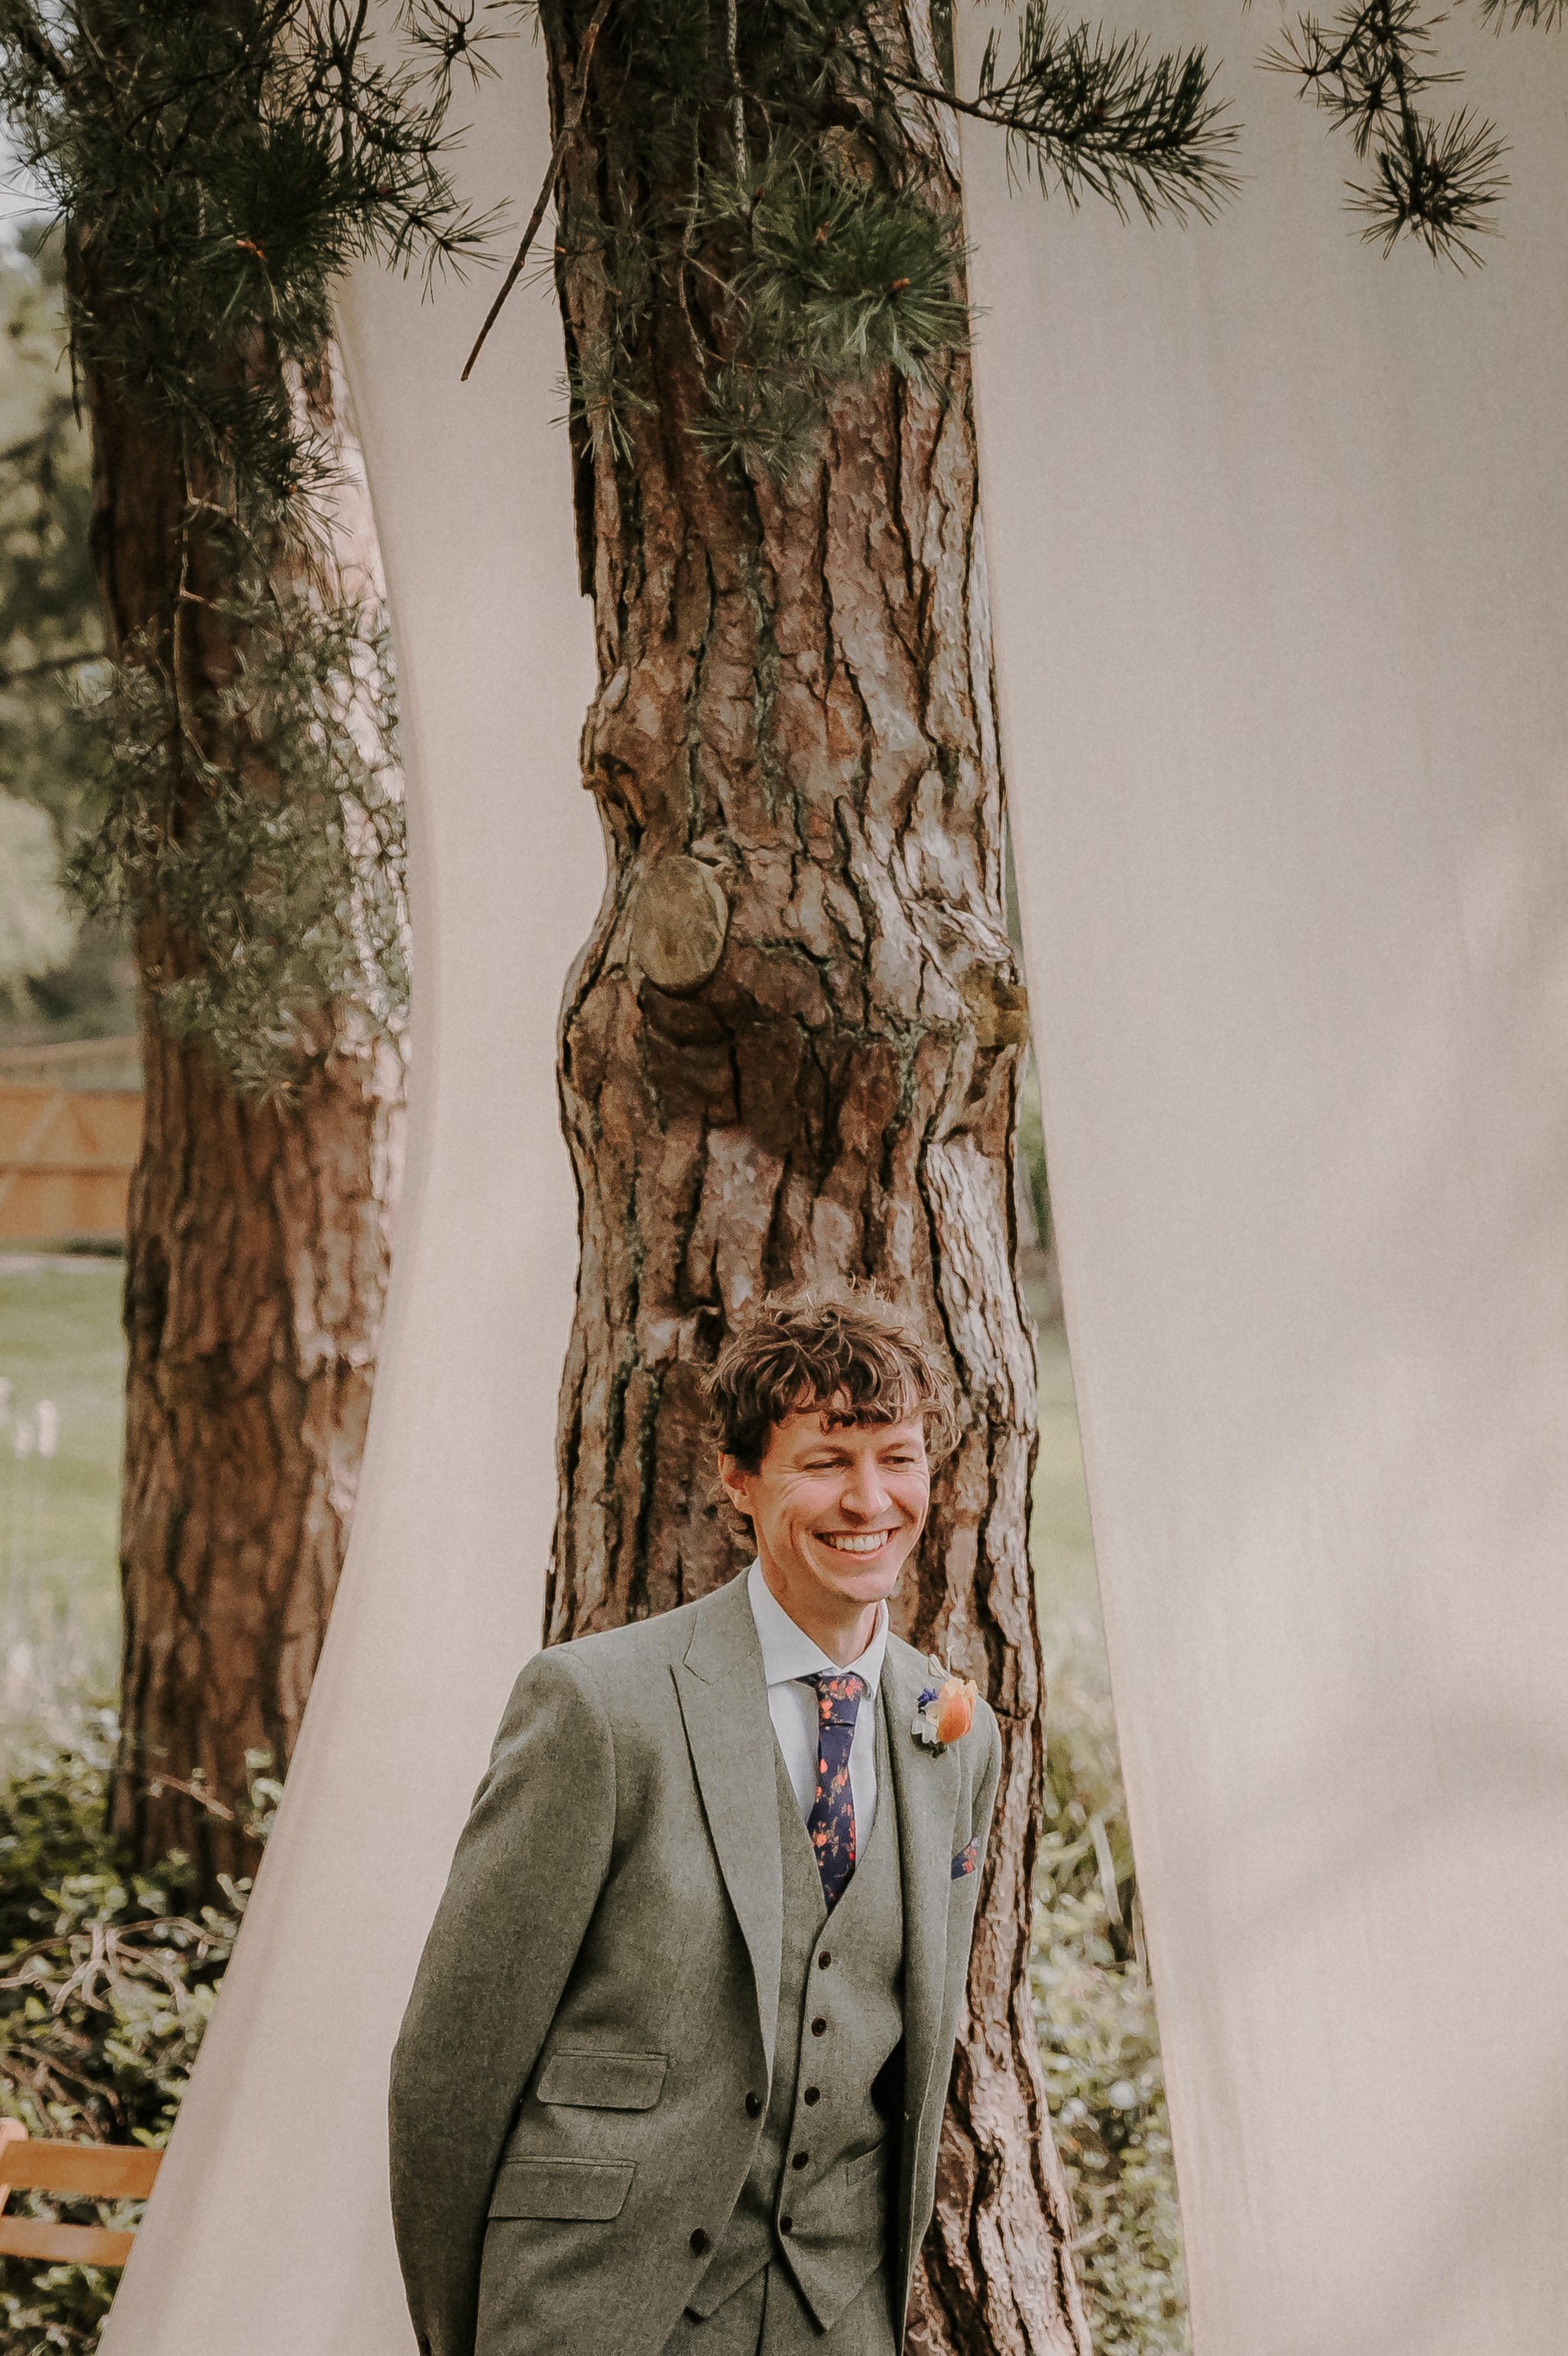 A Grinning Groom's Reaction as He Sees His Bride for the First Time